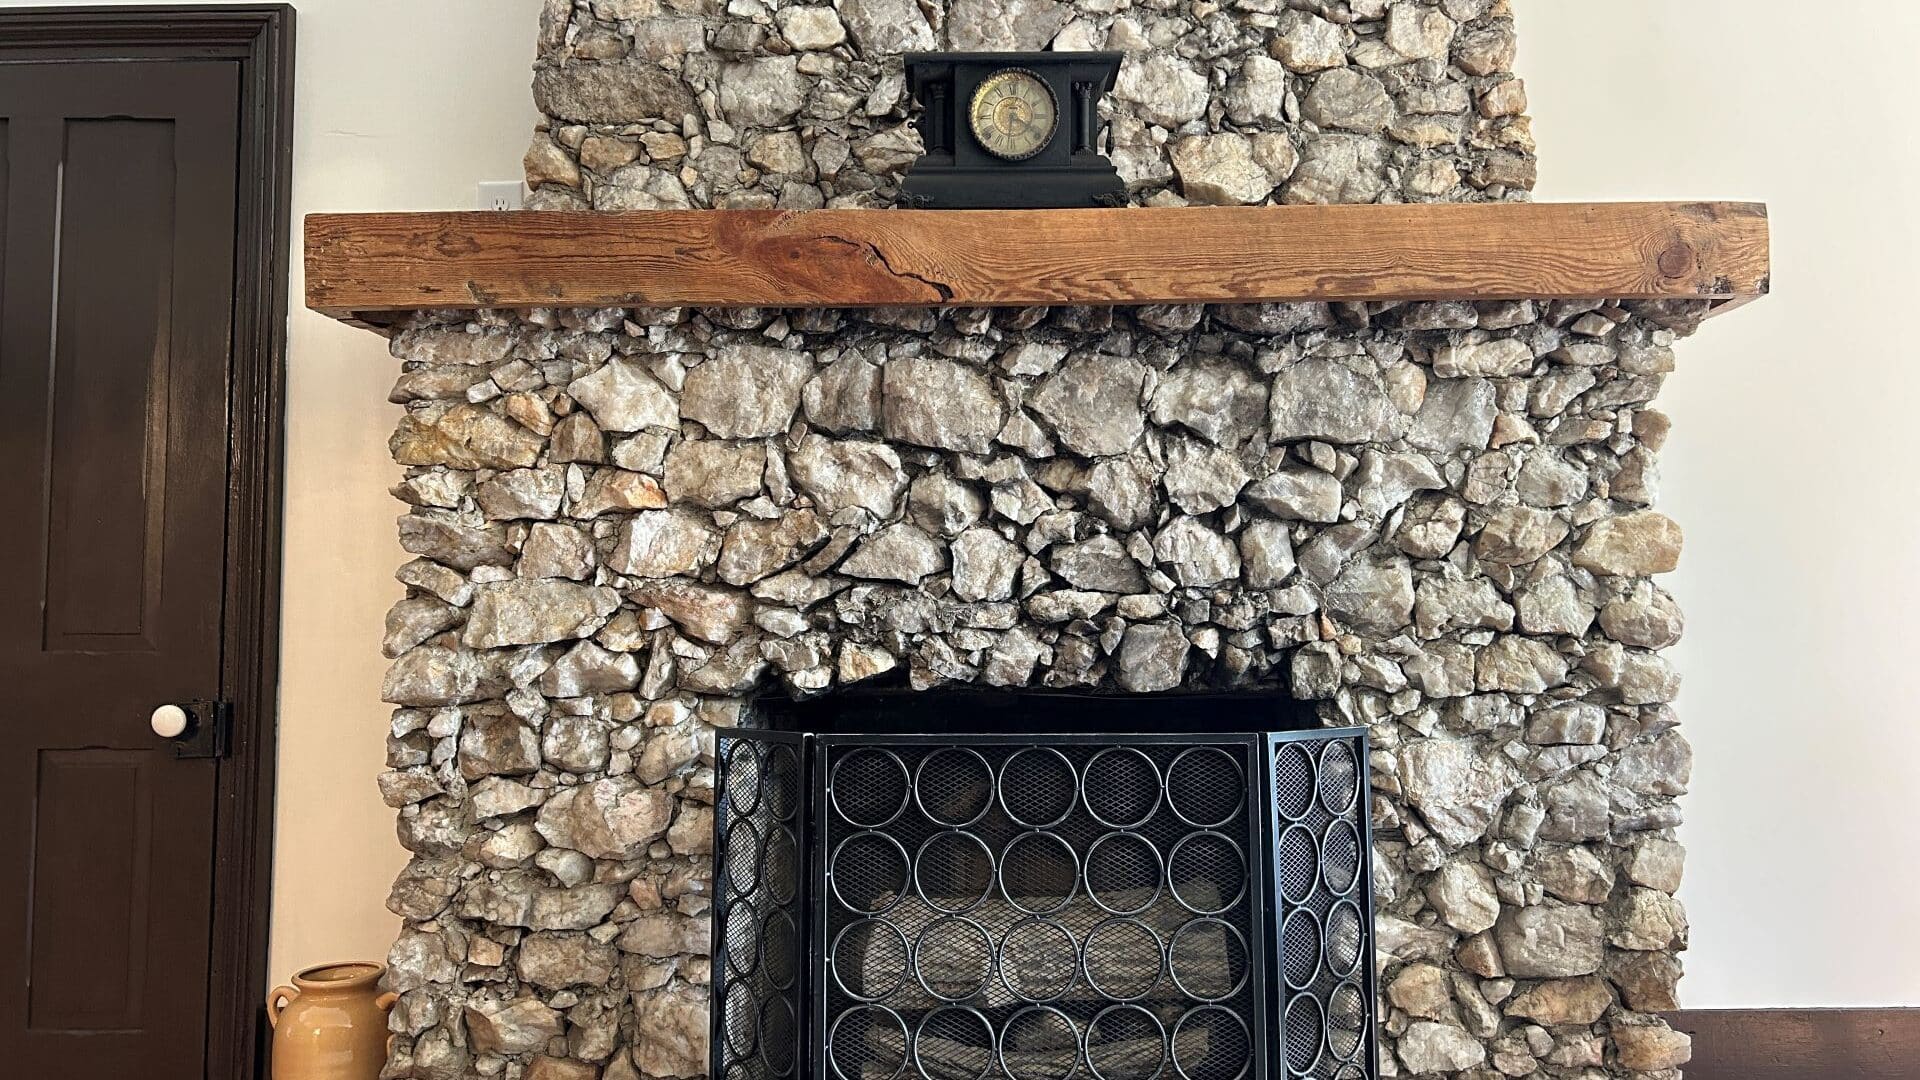 Fireplace covered in rock with wooden mantle and clock.